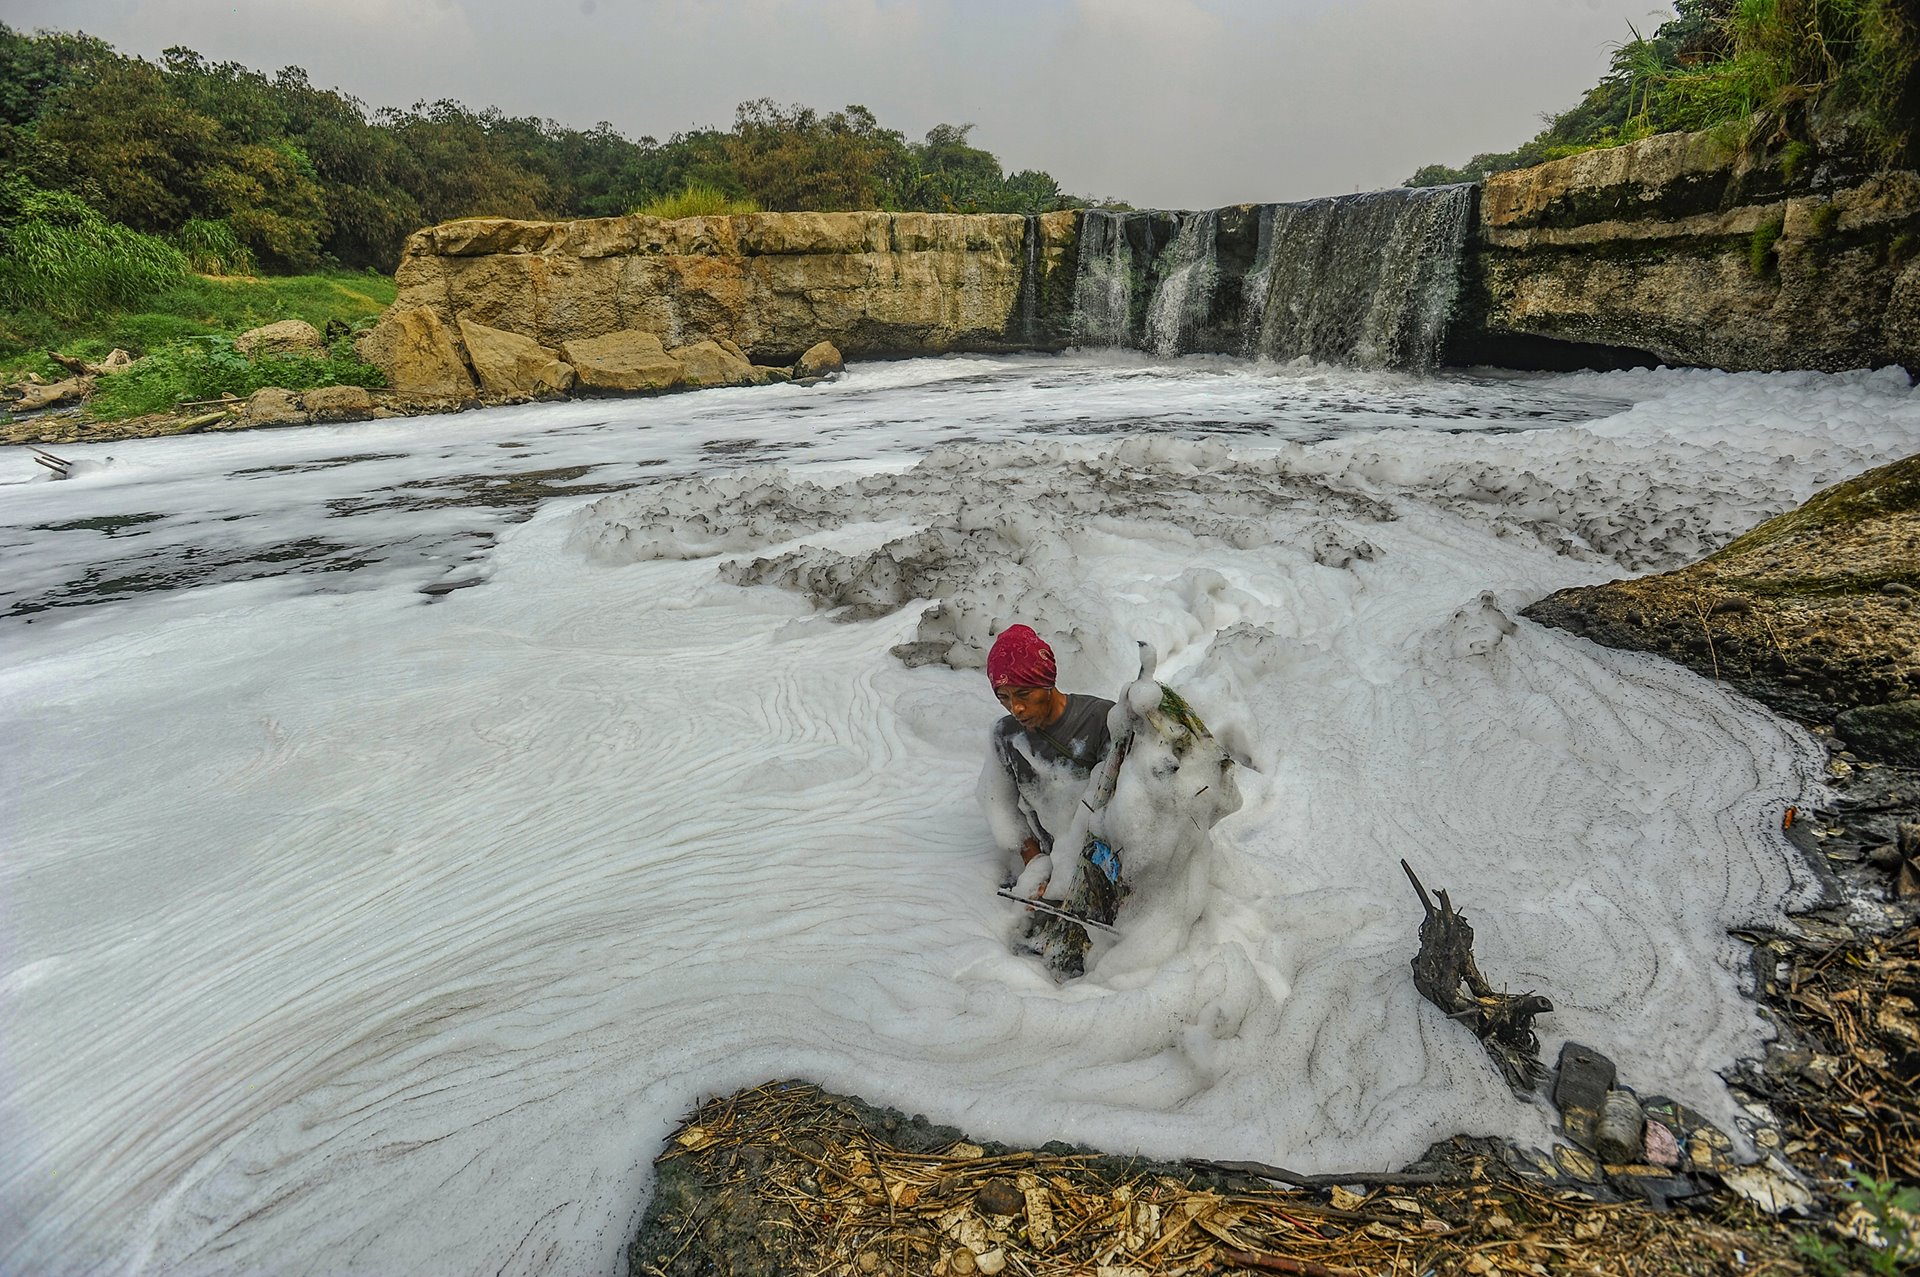 A resident catches fish at a once-scenic waterfall on the Cileungsi River. The thick foam on the water is largely a product of waste runoff from nearby industries. Curug Parigi, Indonesia.